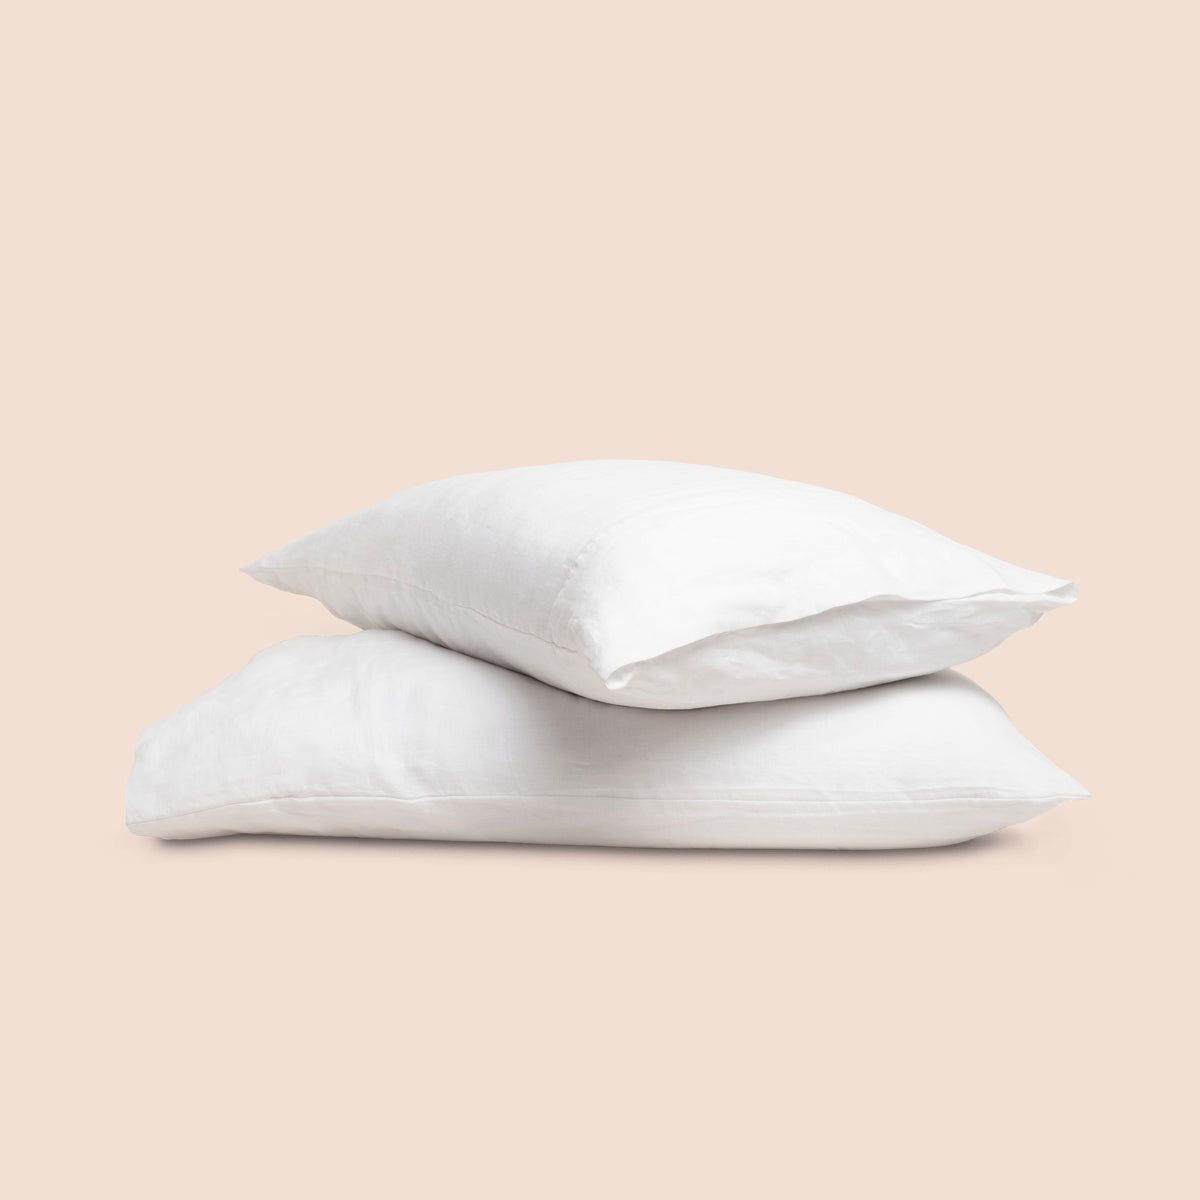 Image of two pillows with White Relaxed Hemp pillowcases stacked on top of each other on a light pink background. The top pillow is showcasing an enveloping feature. 